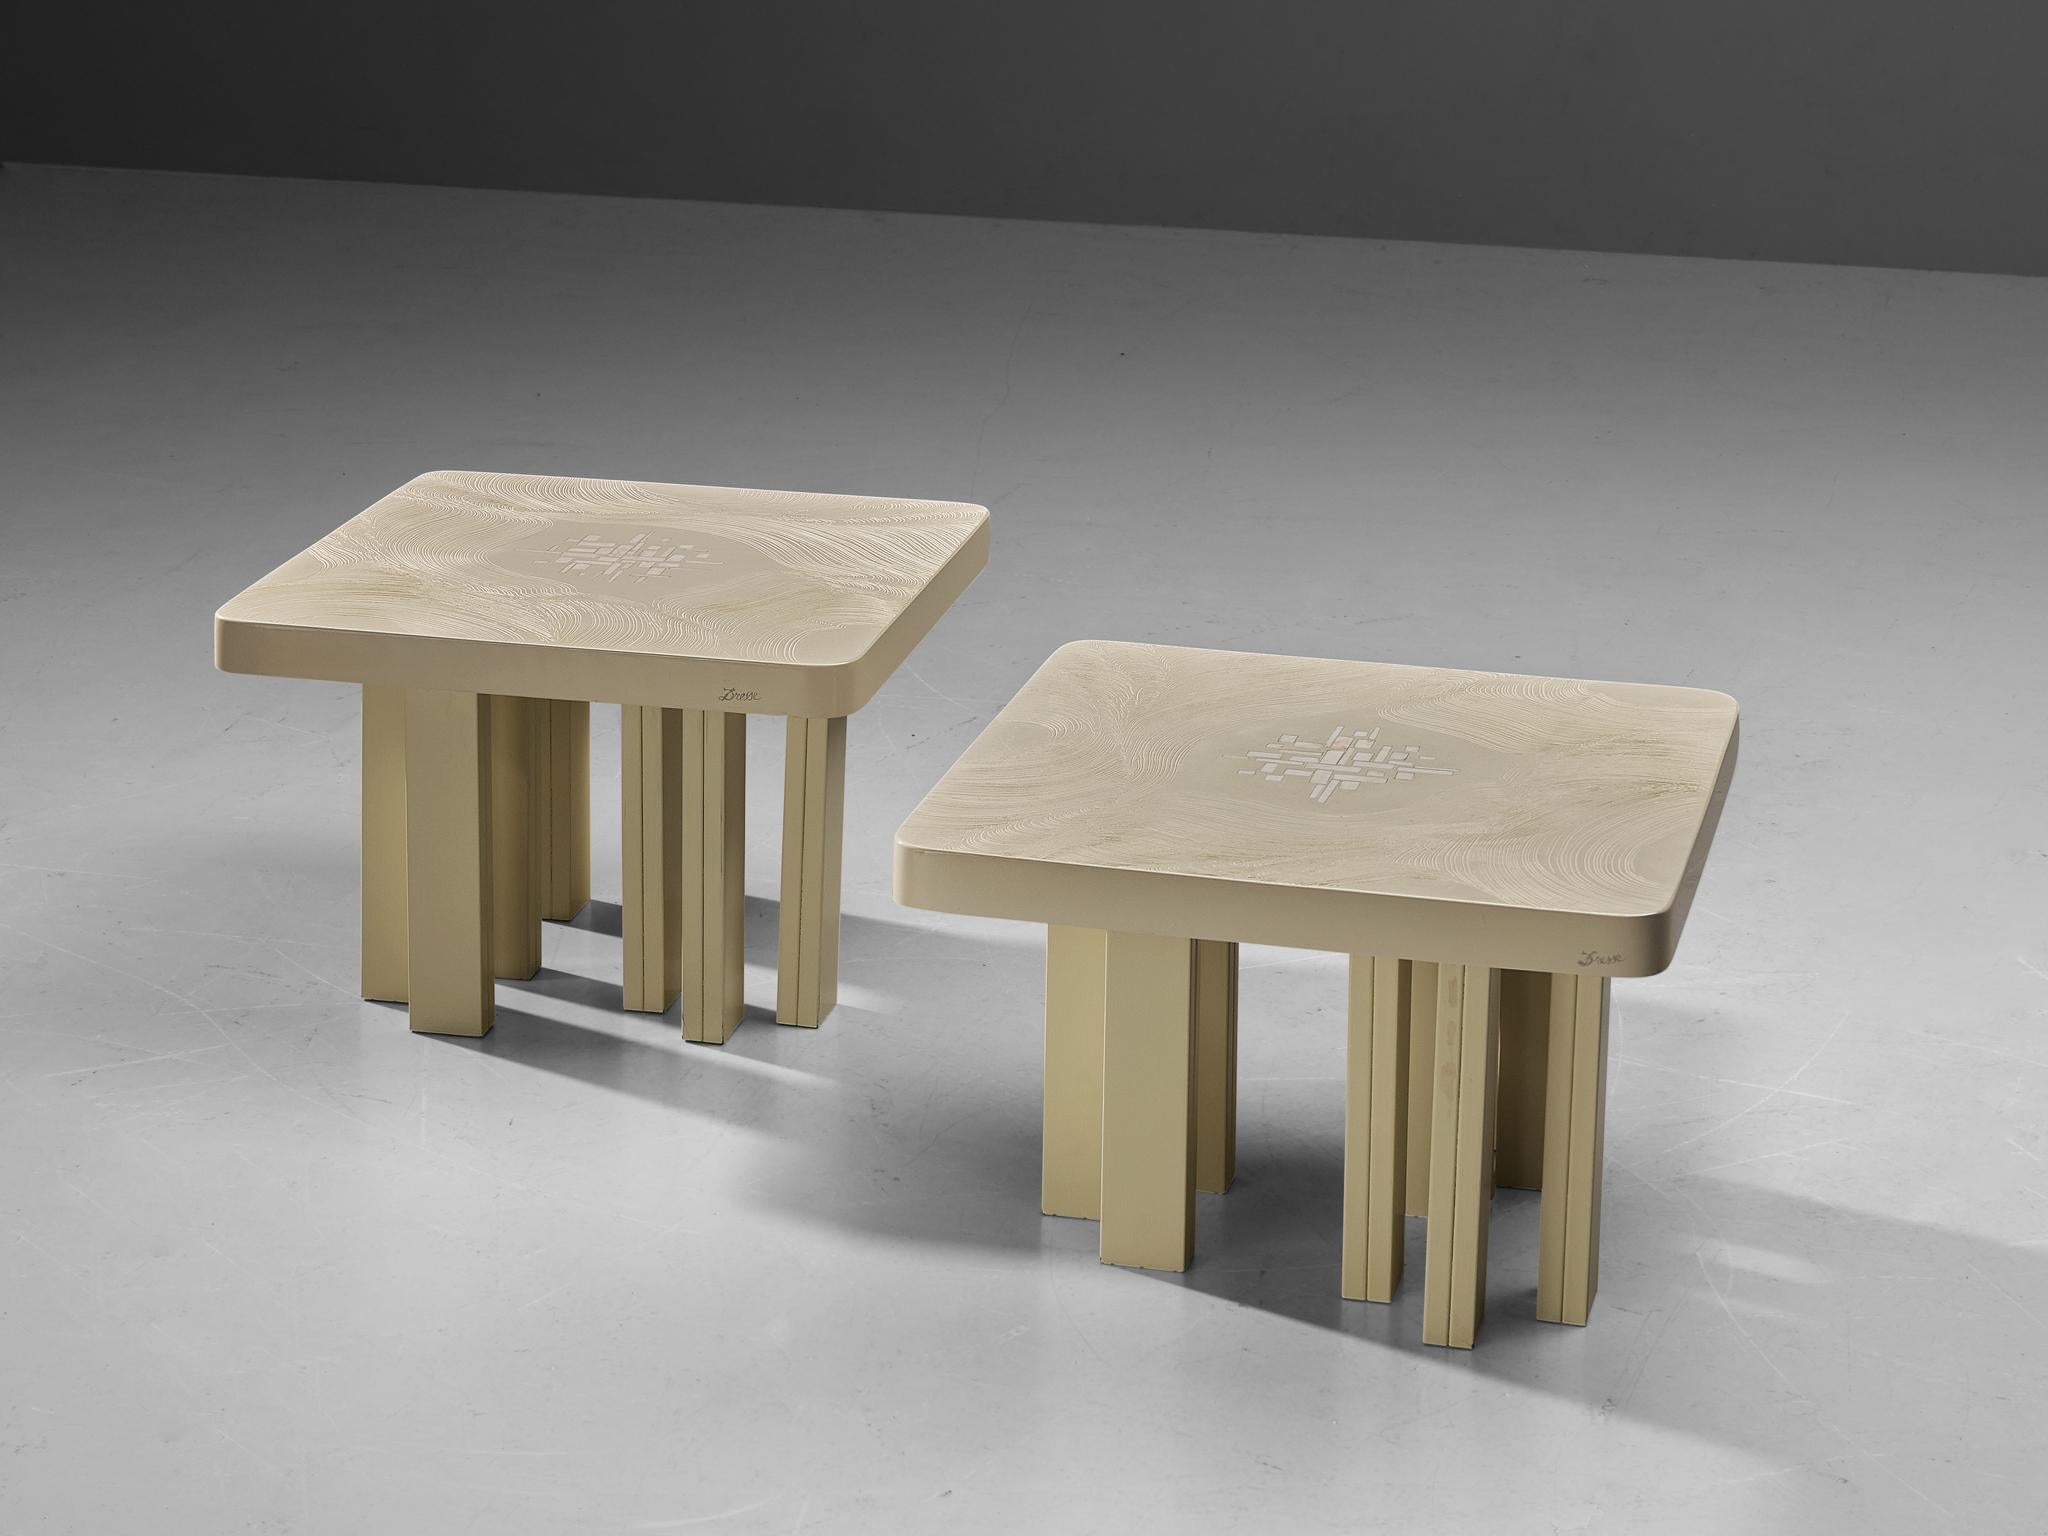 Jean Claude Dresse, pair of coffee tables, resin, bone, Belgium, circa. 1970 

This eccentric pair of coffee tables is a design by the hand of Belgian designer Jean Claude Dresse. Observing the piece now, every inch truly showcases the magnificent